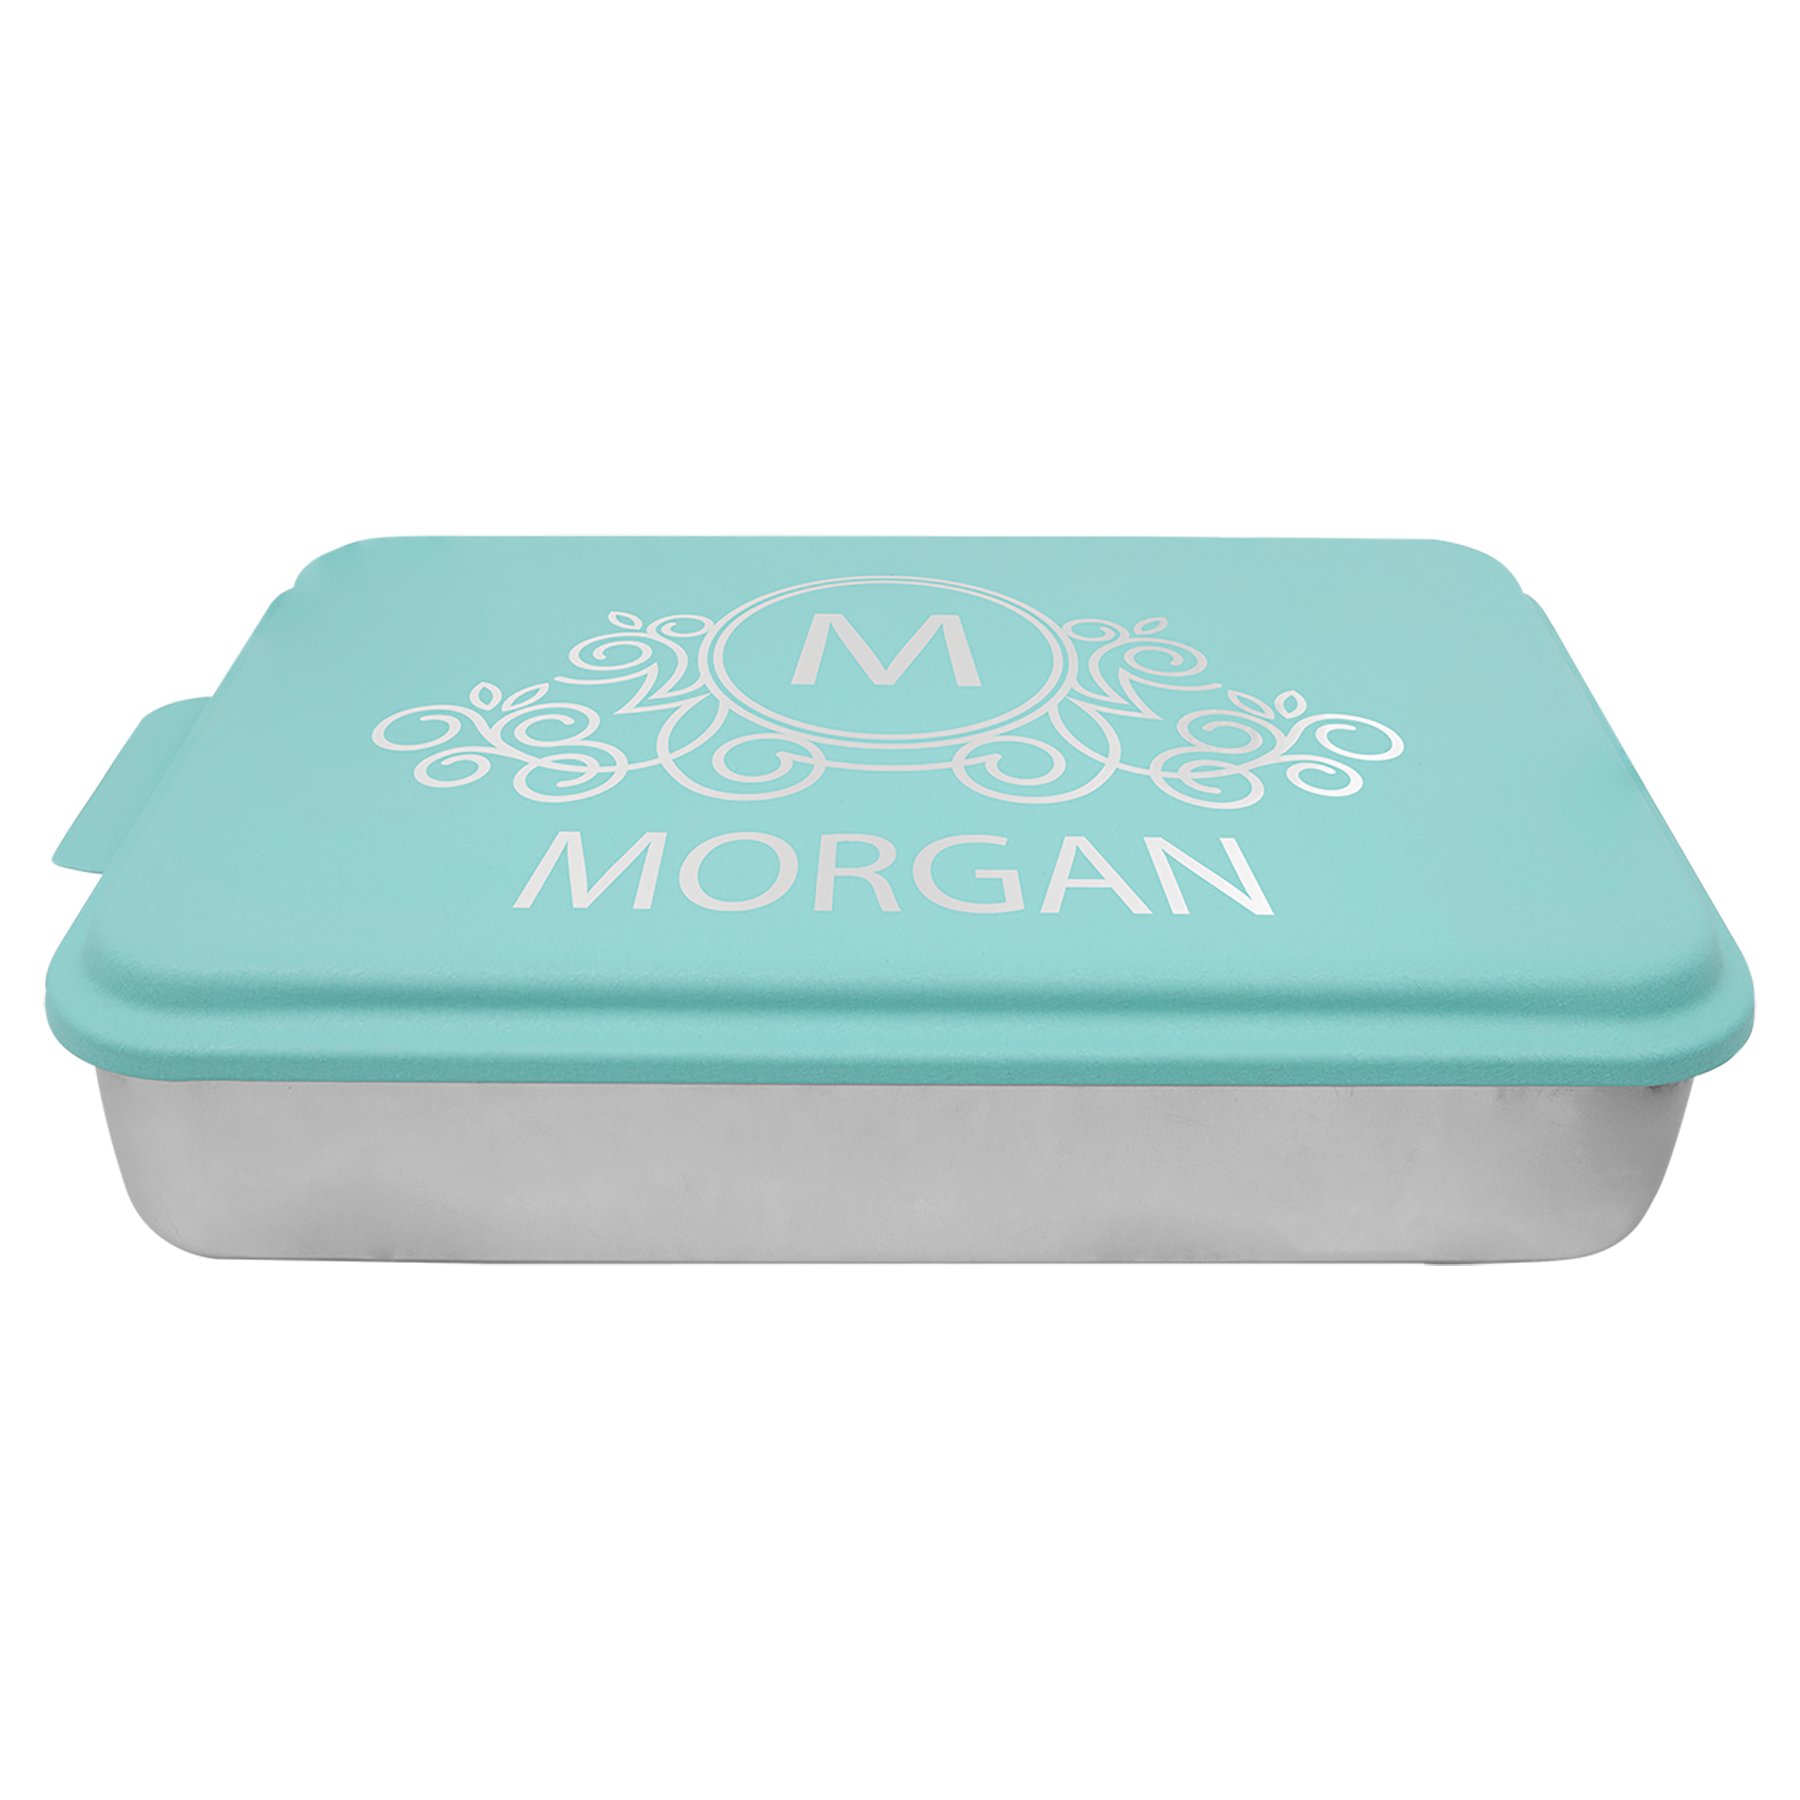 https://samsengravingandgifts.com/wp-content/uploads/2023/08/9-x-13-Aluminum-Cake-Pan-with-Teal-Lid-Create-Unique-Custom-Laser-Engraved-Personalized-Gifts_BPN104.jpg